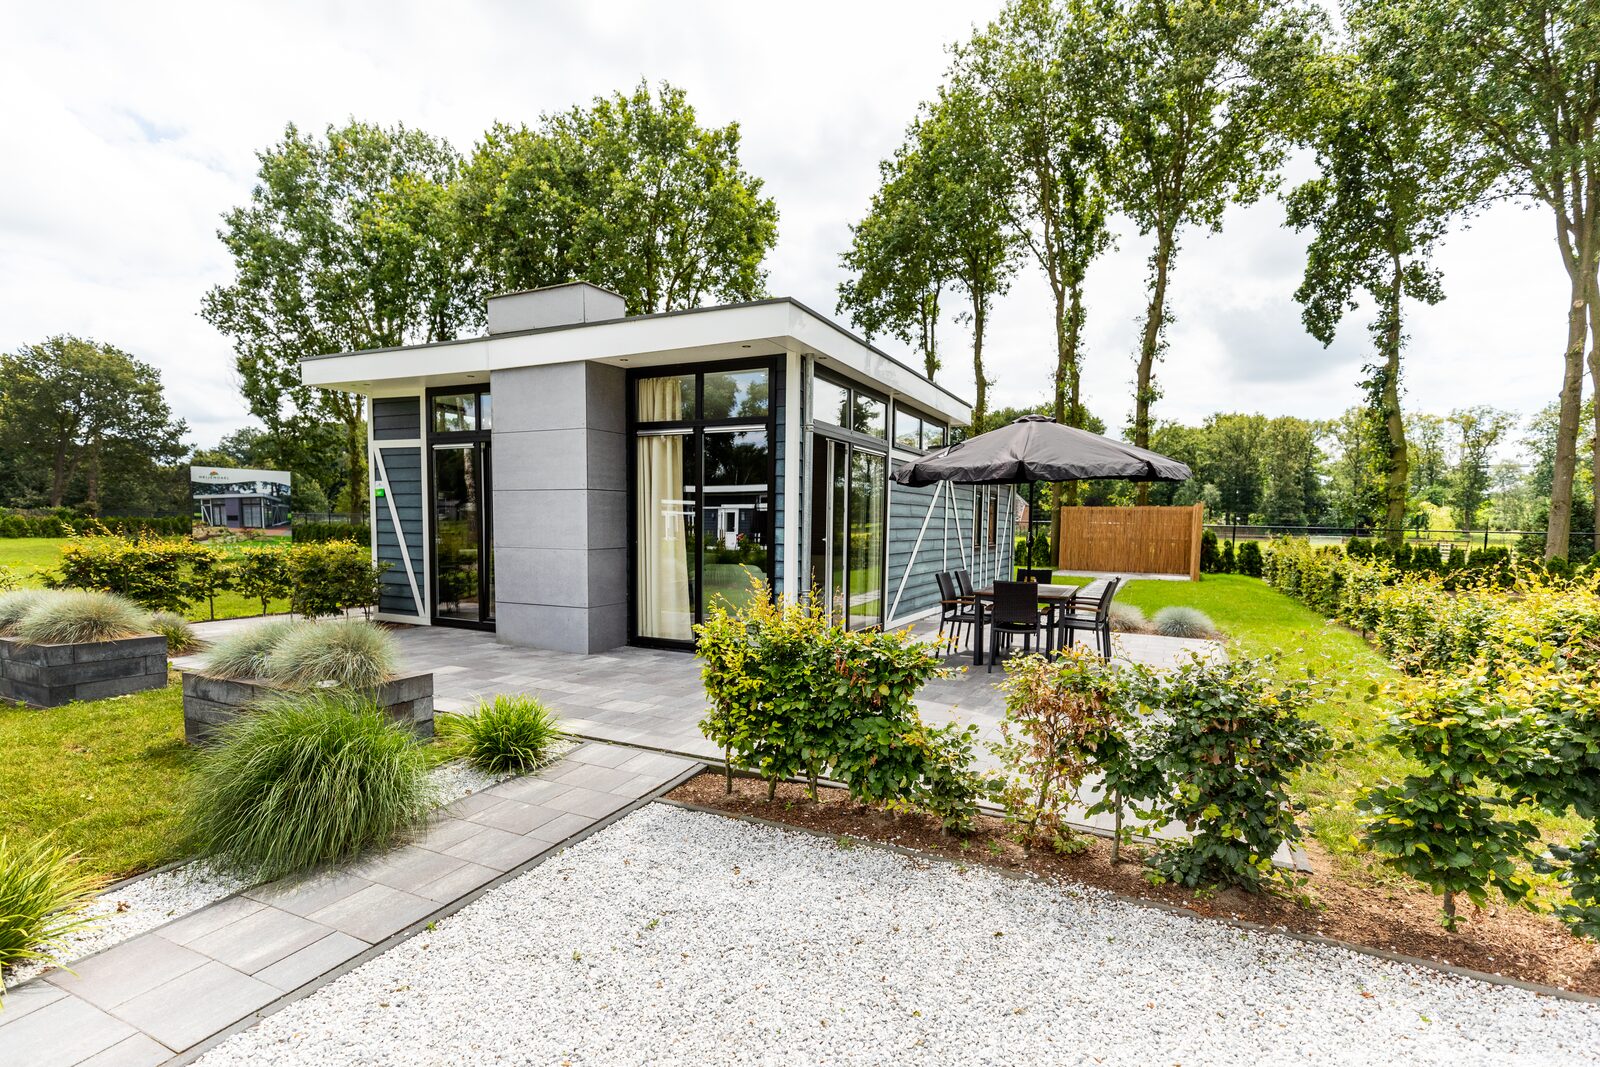 Our bungalows for sale in Limburg